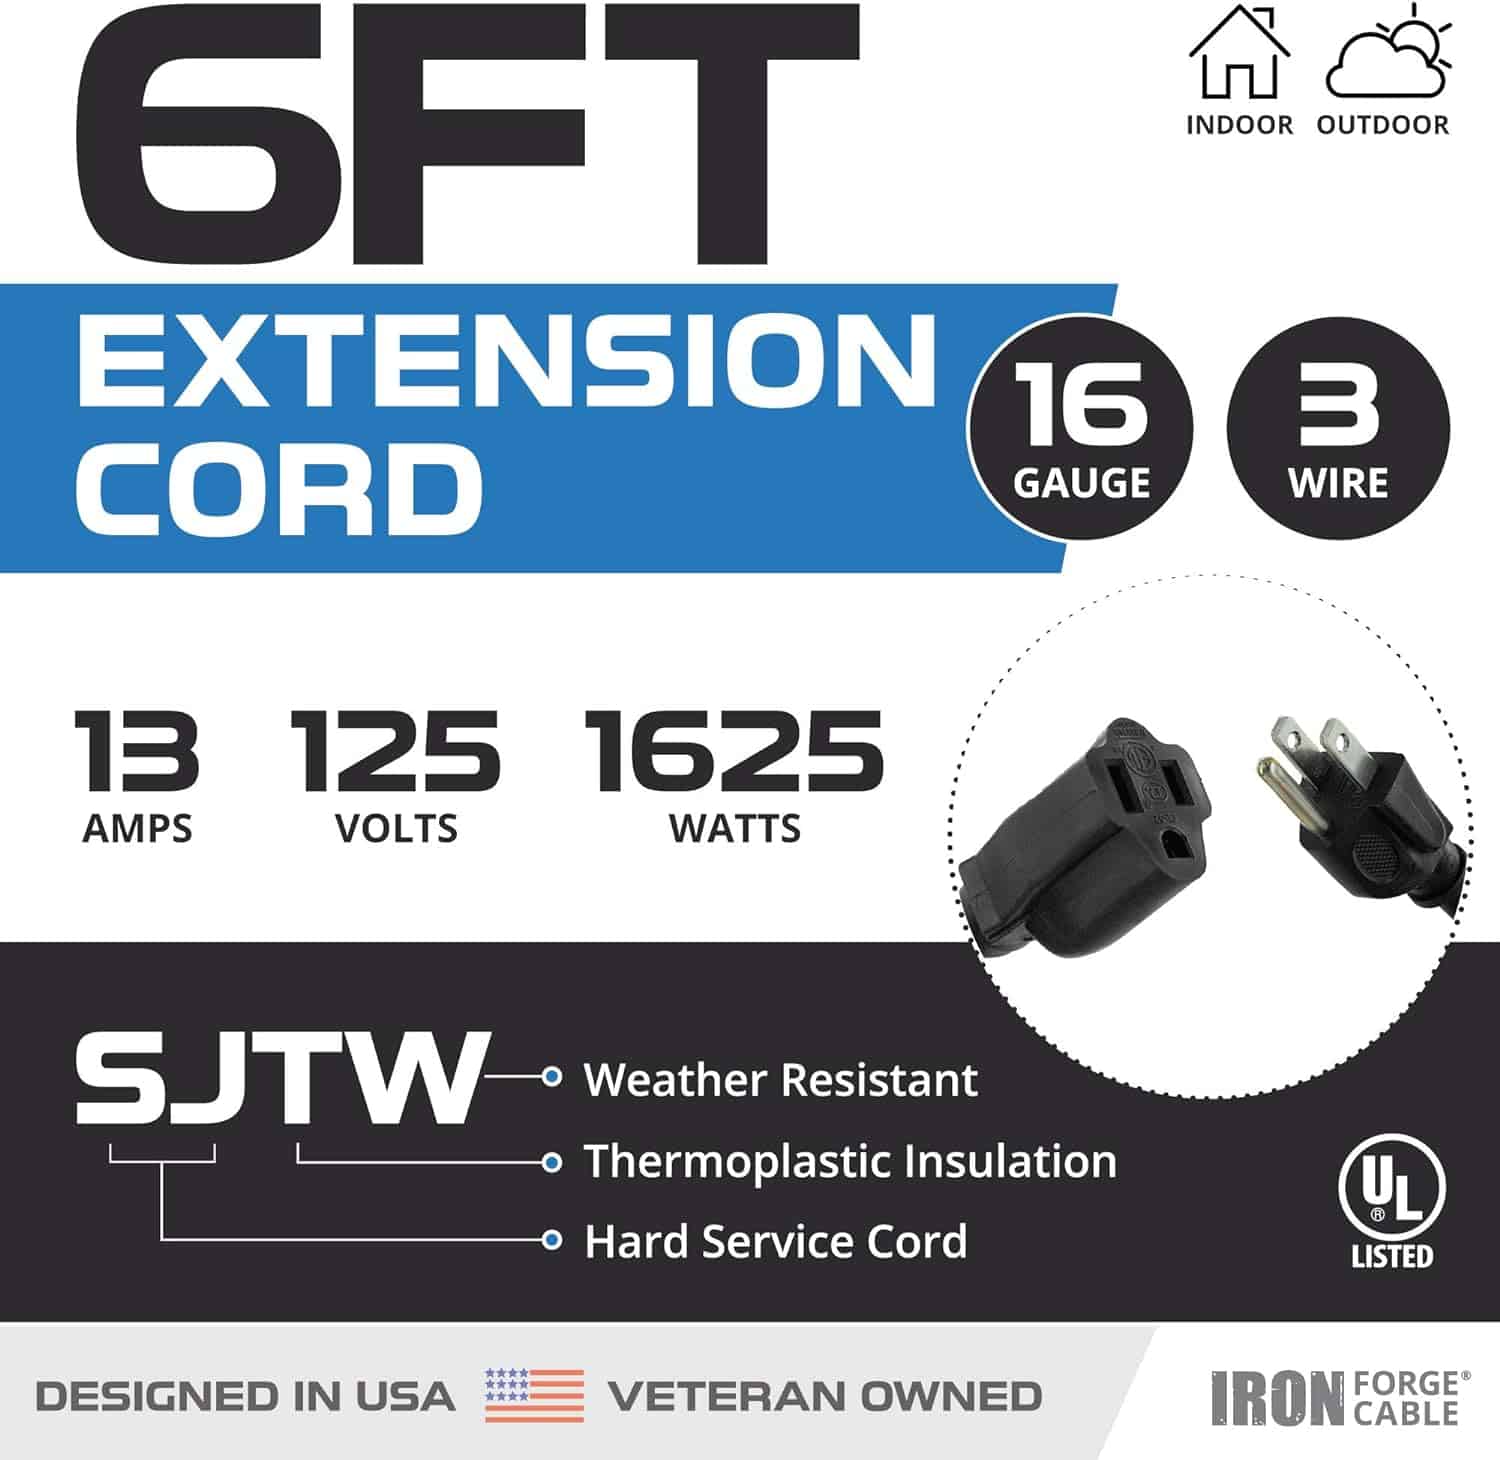 2 Pack of 6 Ft Outdoor Extension Cords – 16 3 Heavy Duty Black Extension Cord Pack 3